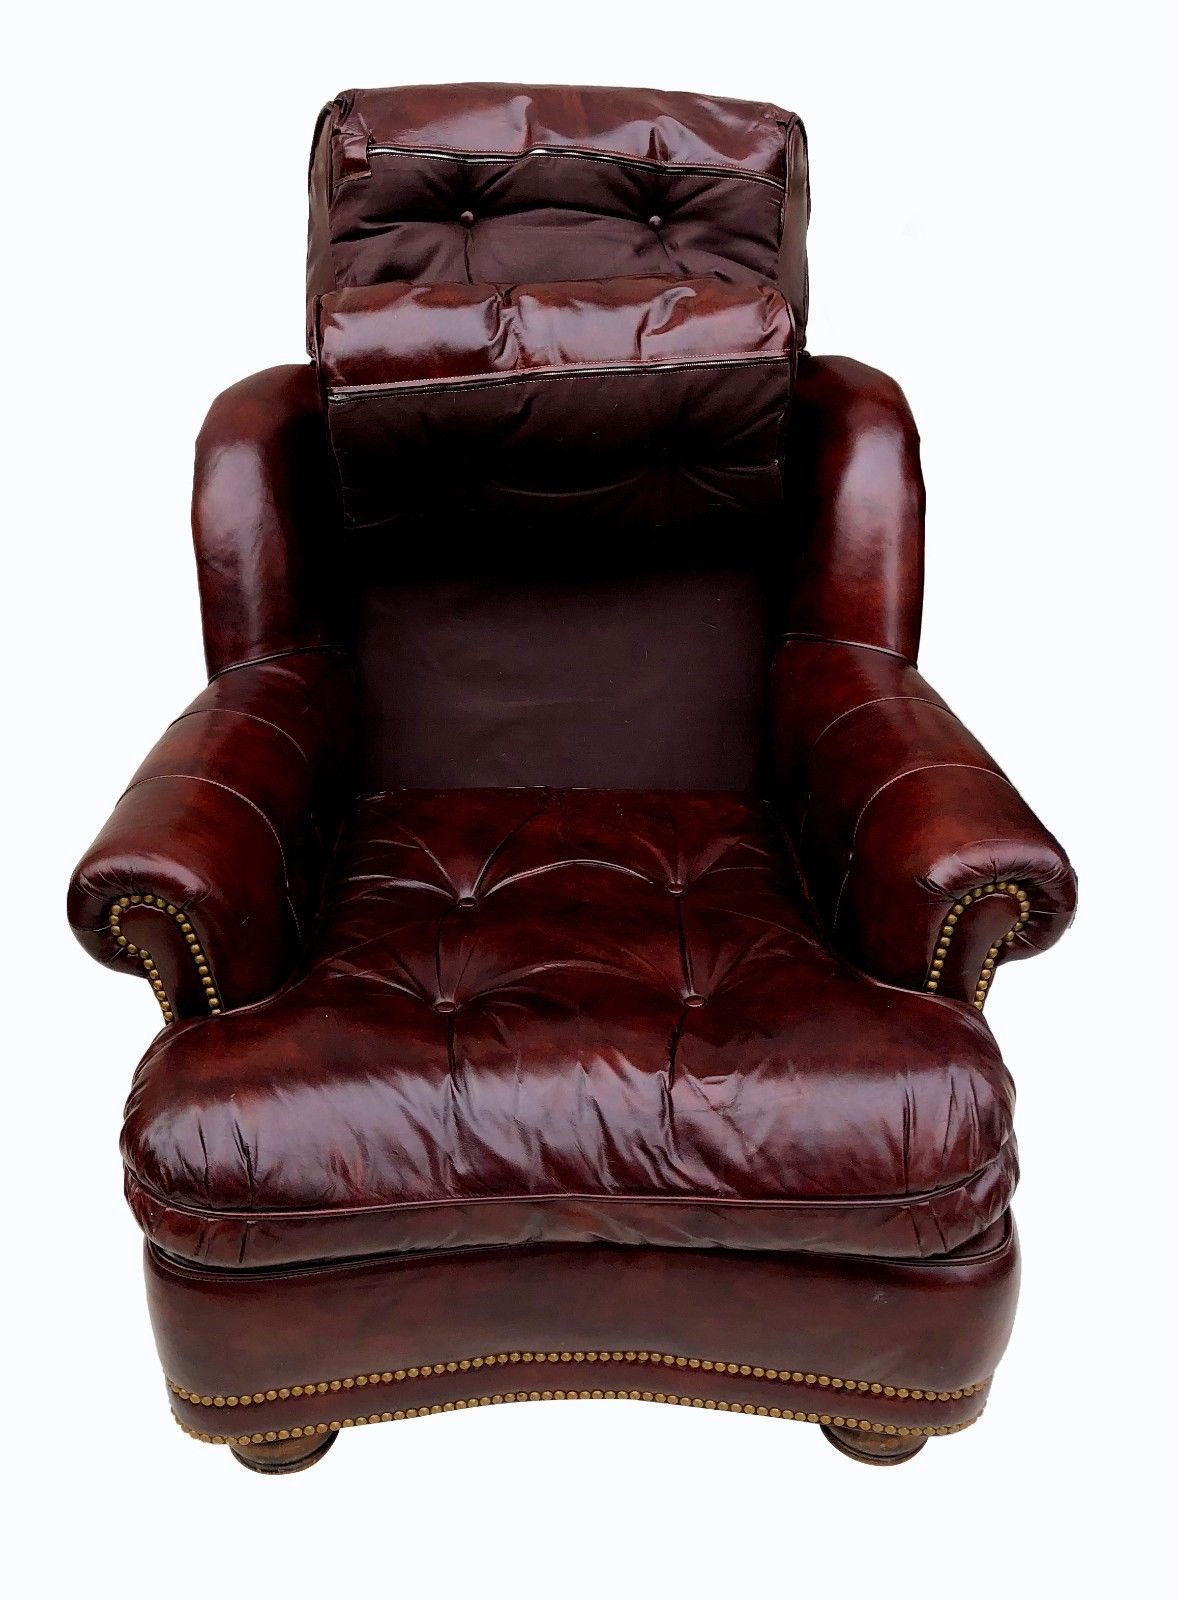 PAIR HANCOCK & MOORE WINE COLORED LEATHER CHESTERFIELD CLUB CHAIRS